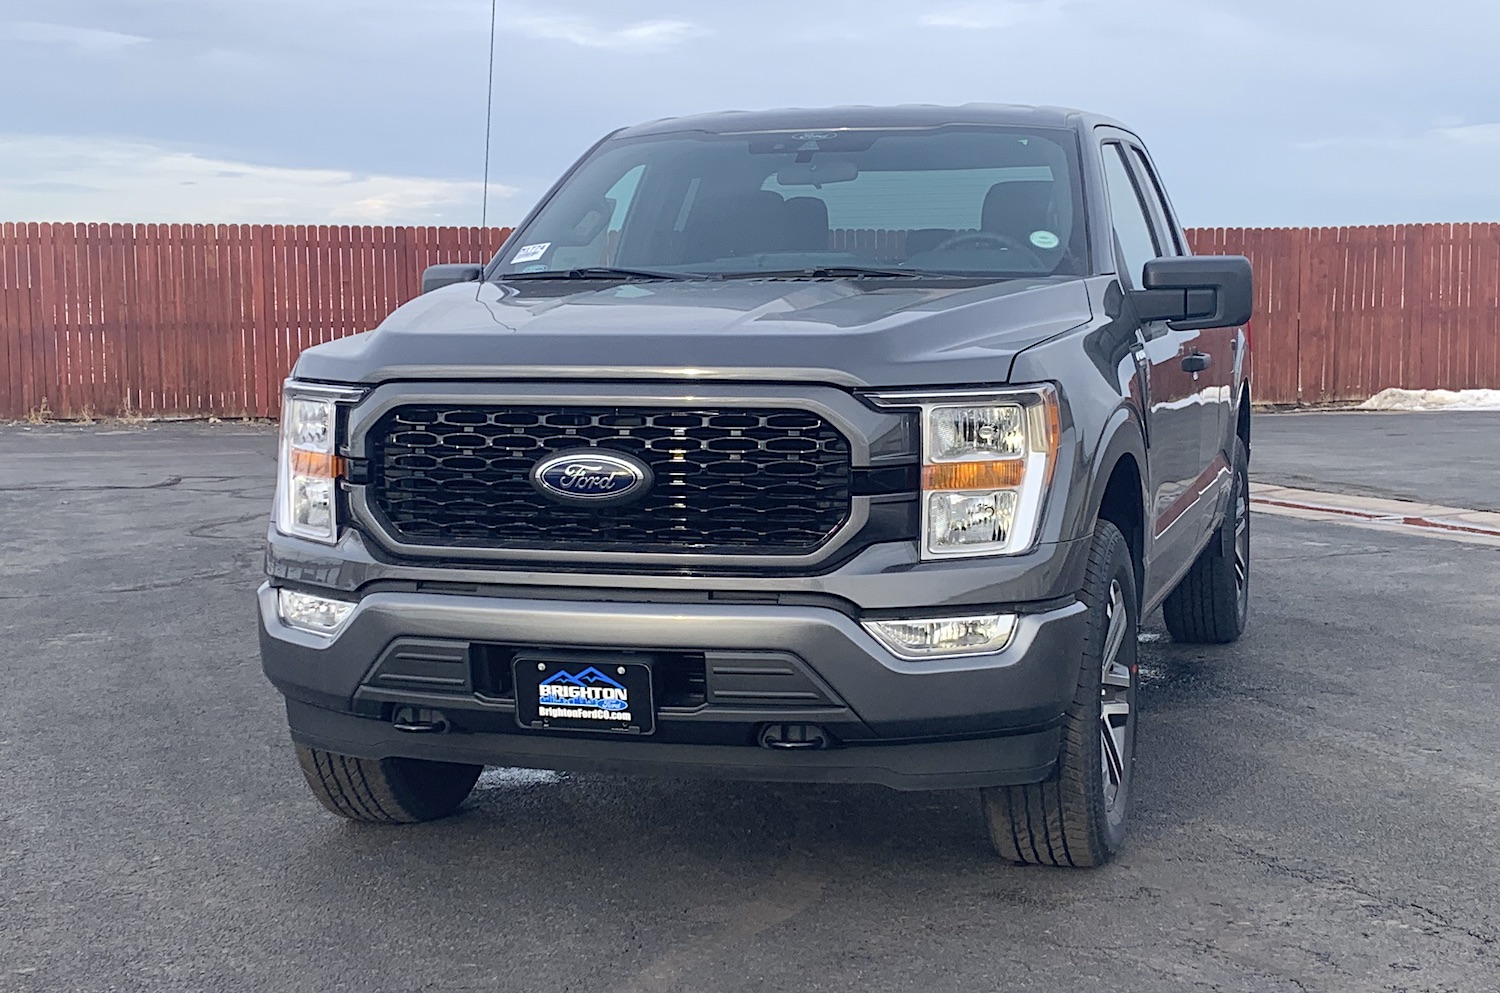 2021-ford-f-150-xl-stx-grille - The Fast Lane Truck